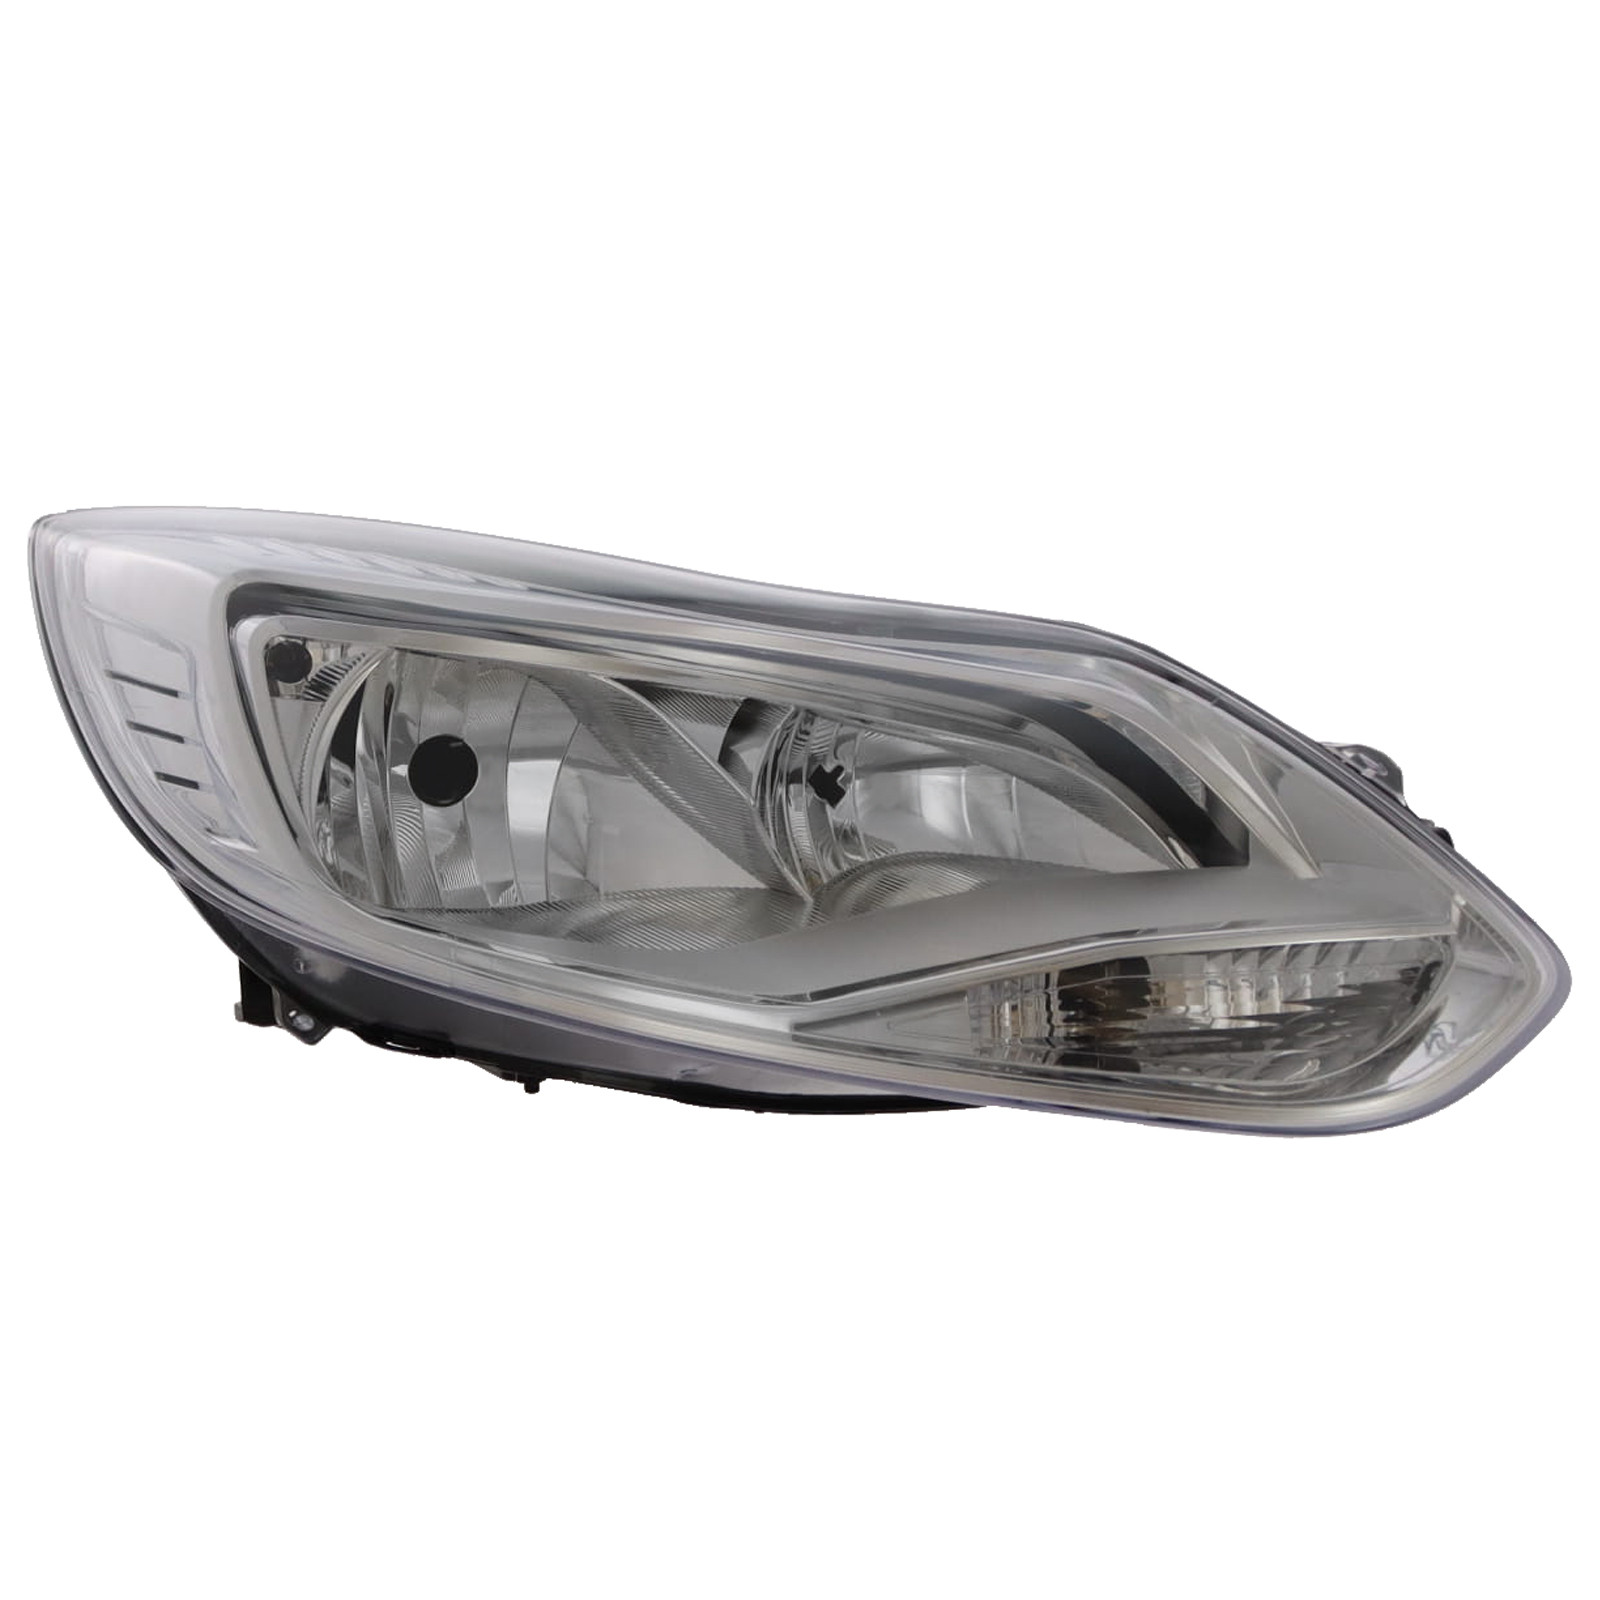 Ford Focus 2011-2014 Halogen, Electric With Motor, Headlight / Headlamp with Chrome Surround Drivers Side (RH)